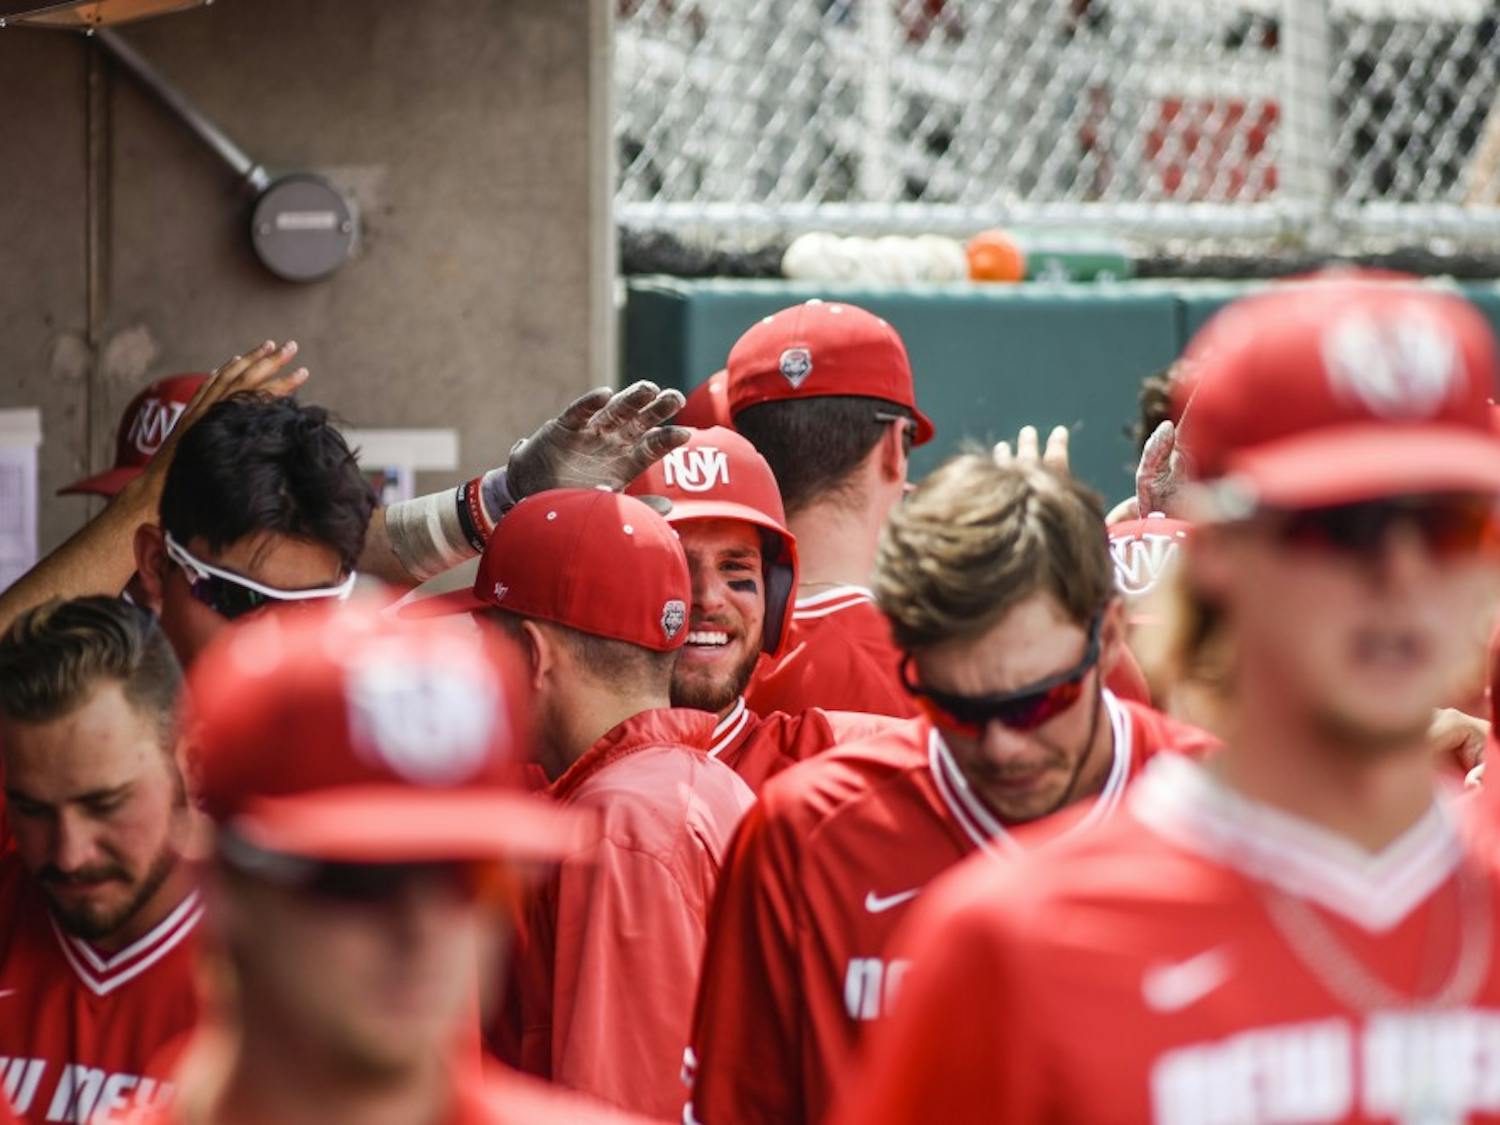 Junior Luis Gonzalez smiles and walks through the Lobo dug out after scoring a run against Air Force Saturday, May 6, 2017 at Santa Ana Star Field. The Lobos defeated Air Force&nbsp;11-6.